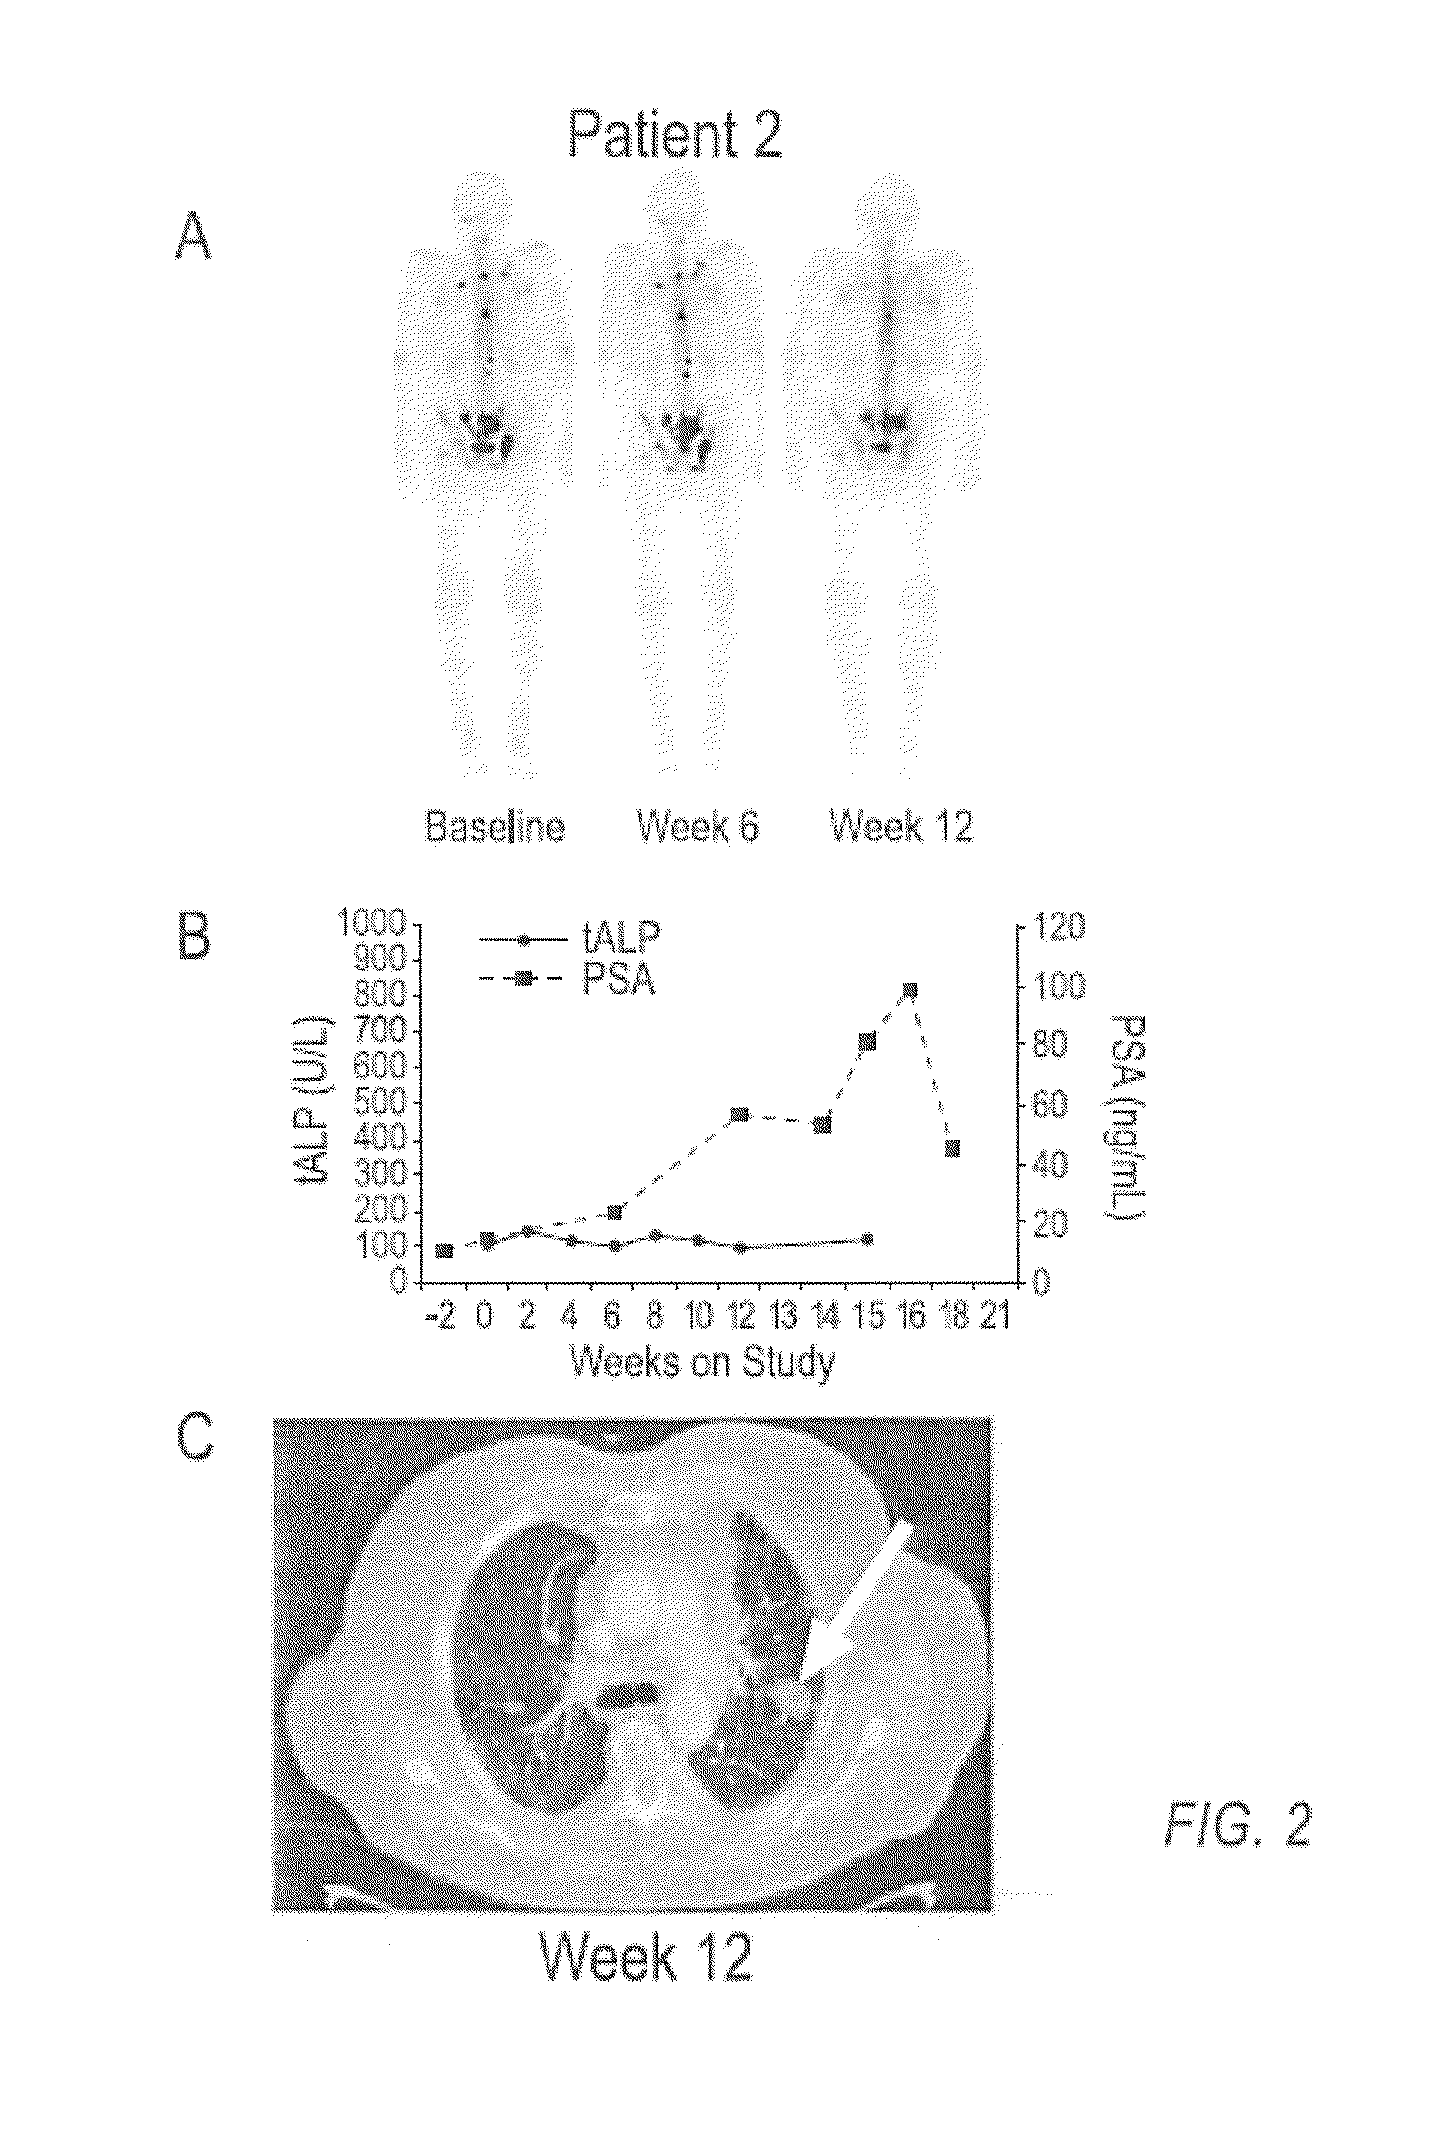 Method of Treating Cancer and Bone Cancer Pain